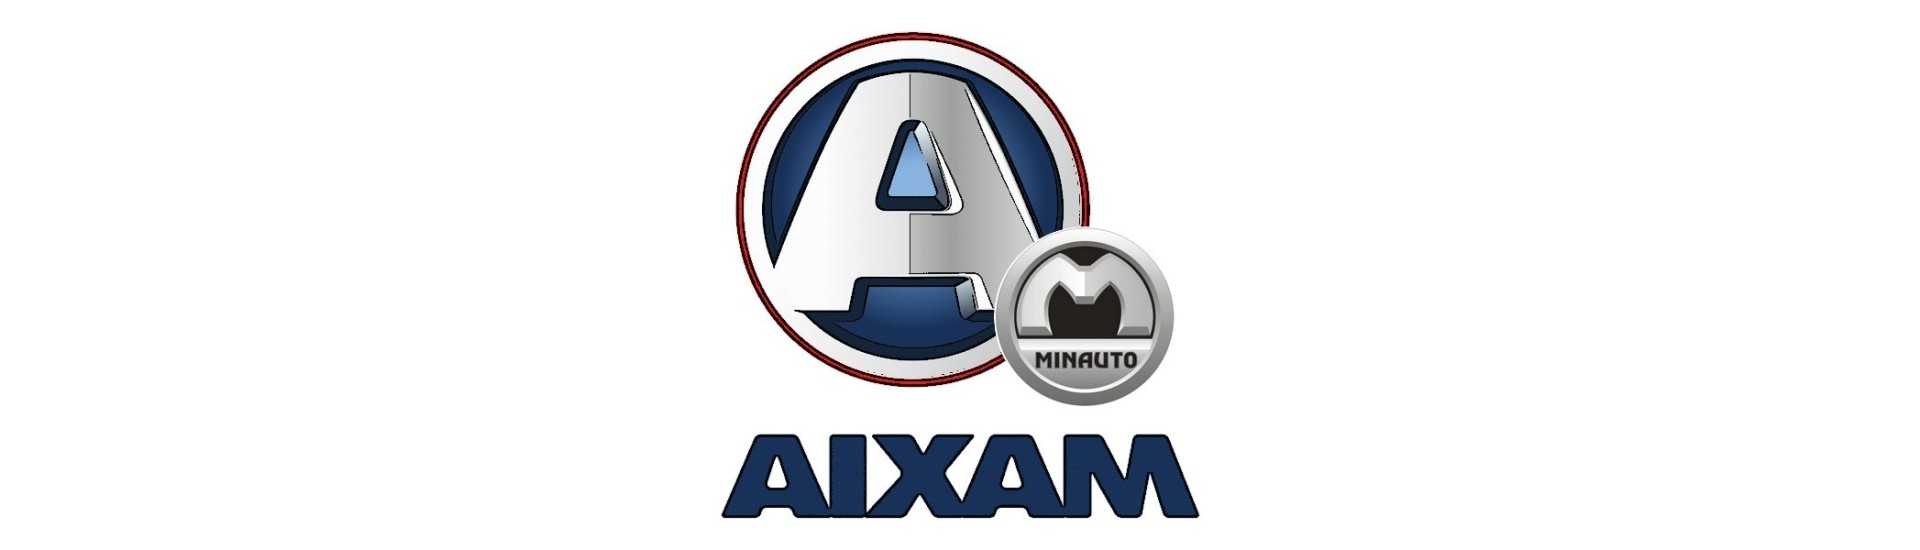 Engine soundproofing at the best price car without a permit Aixam Minauto